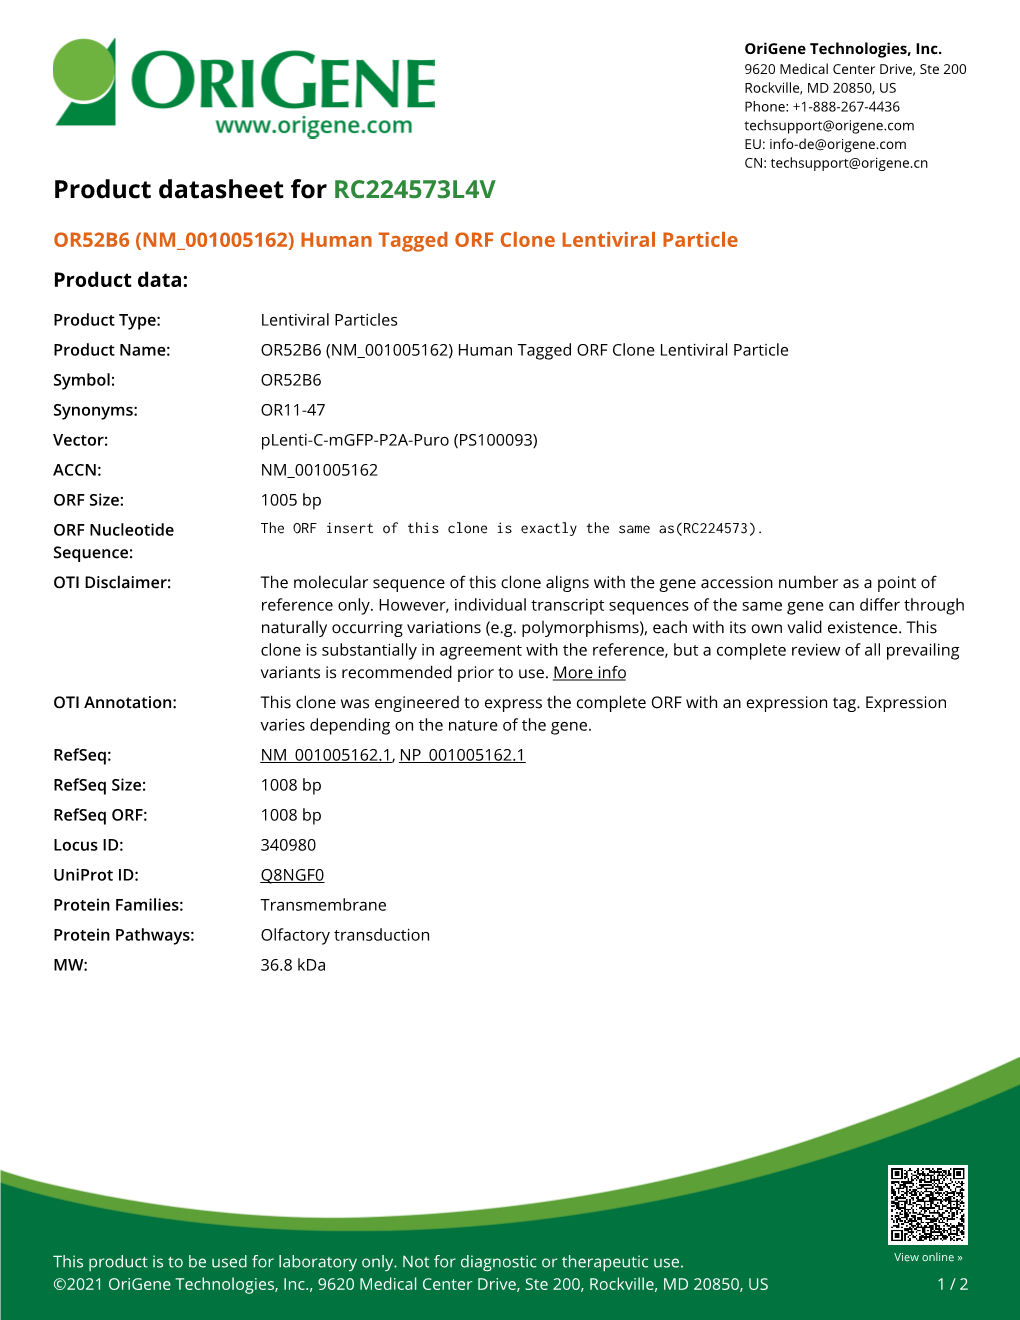 OR52B6 (NM 001005162) Human Tagged ORF Clone Lentiviral Particle Product Data